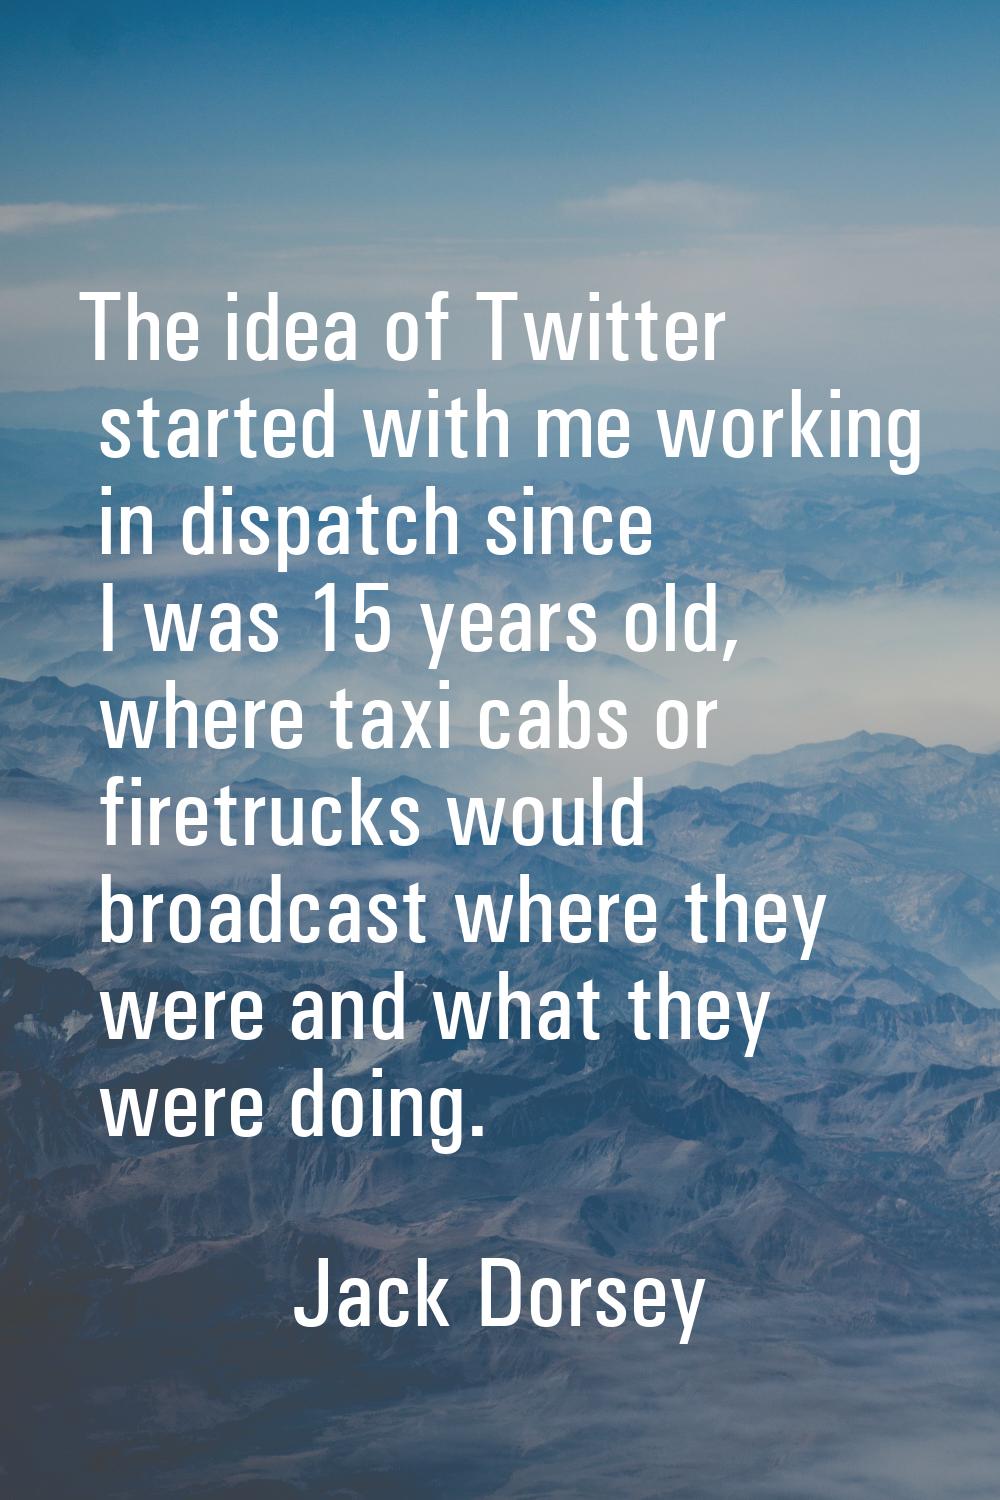 The idea of Twitter started with me working in dispatch since I was 15 years old, where taxi cabs o